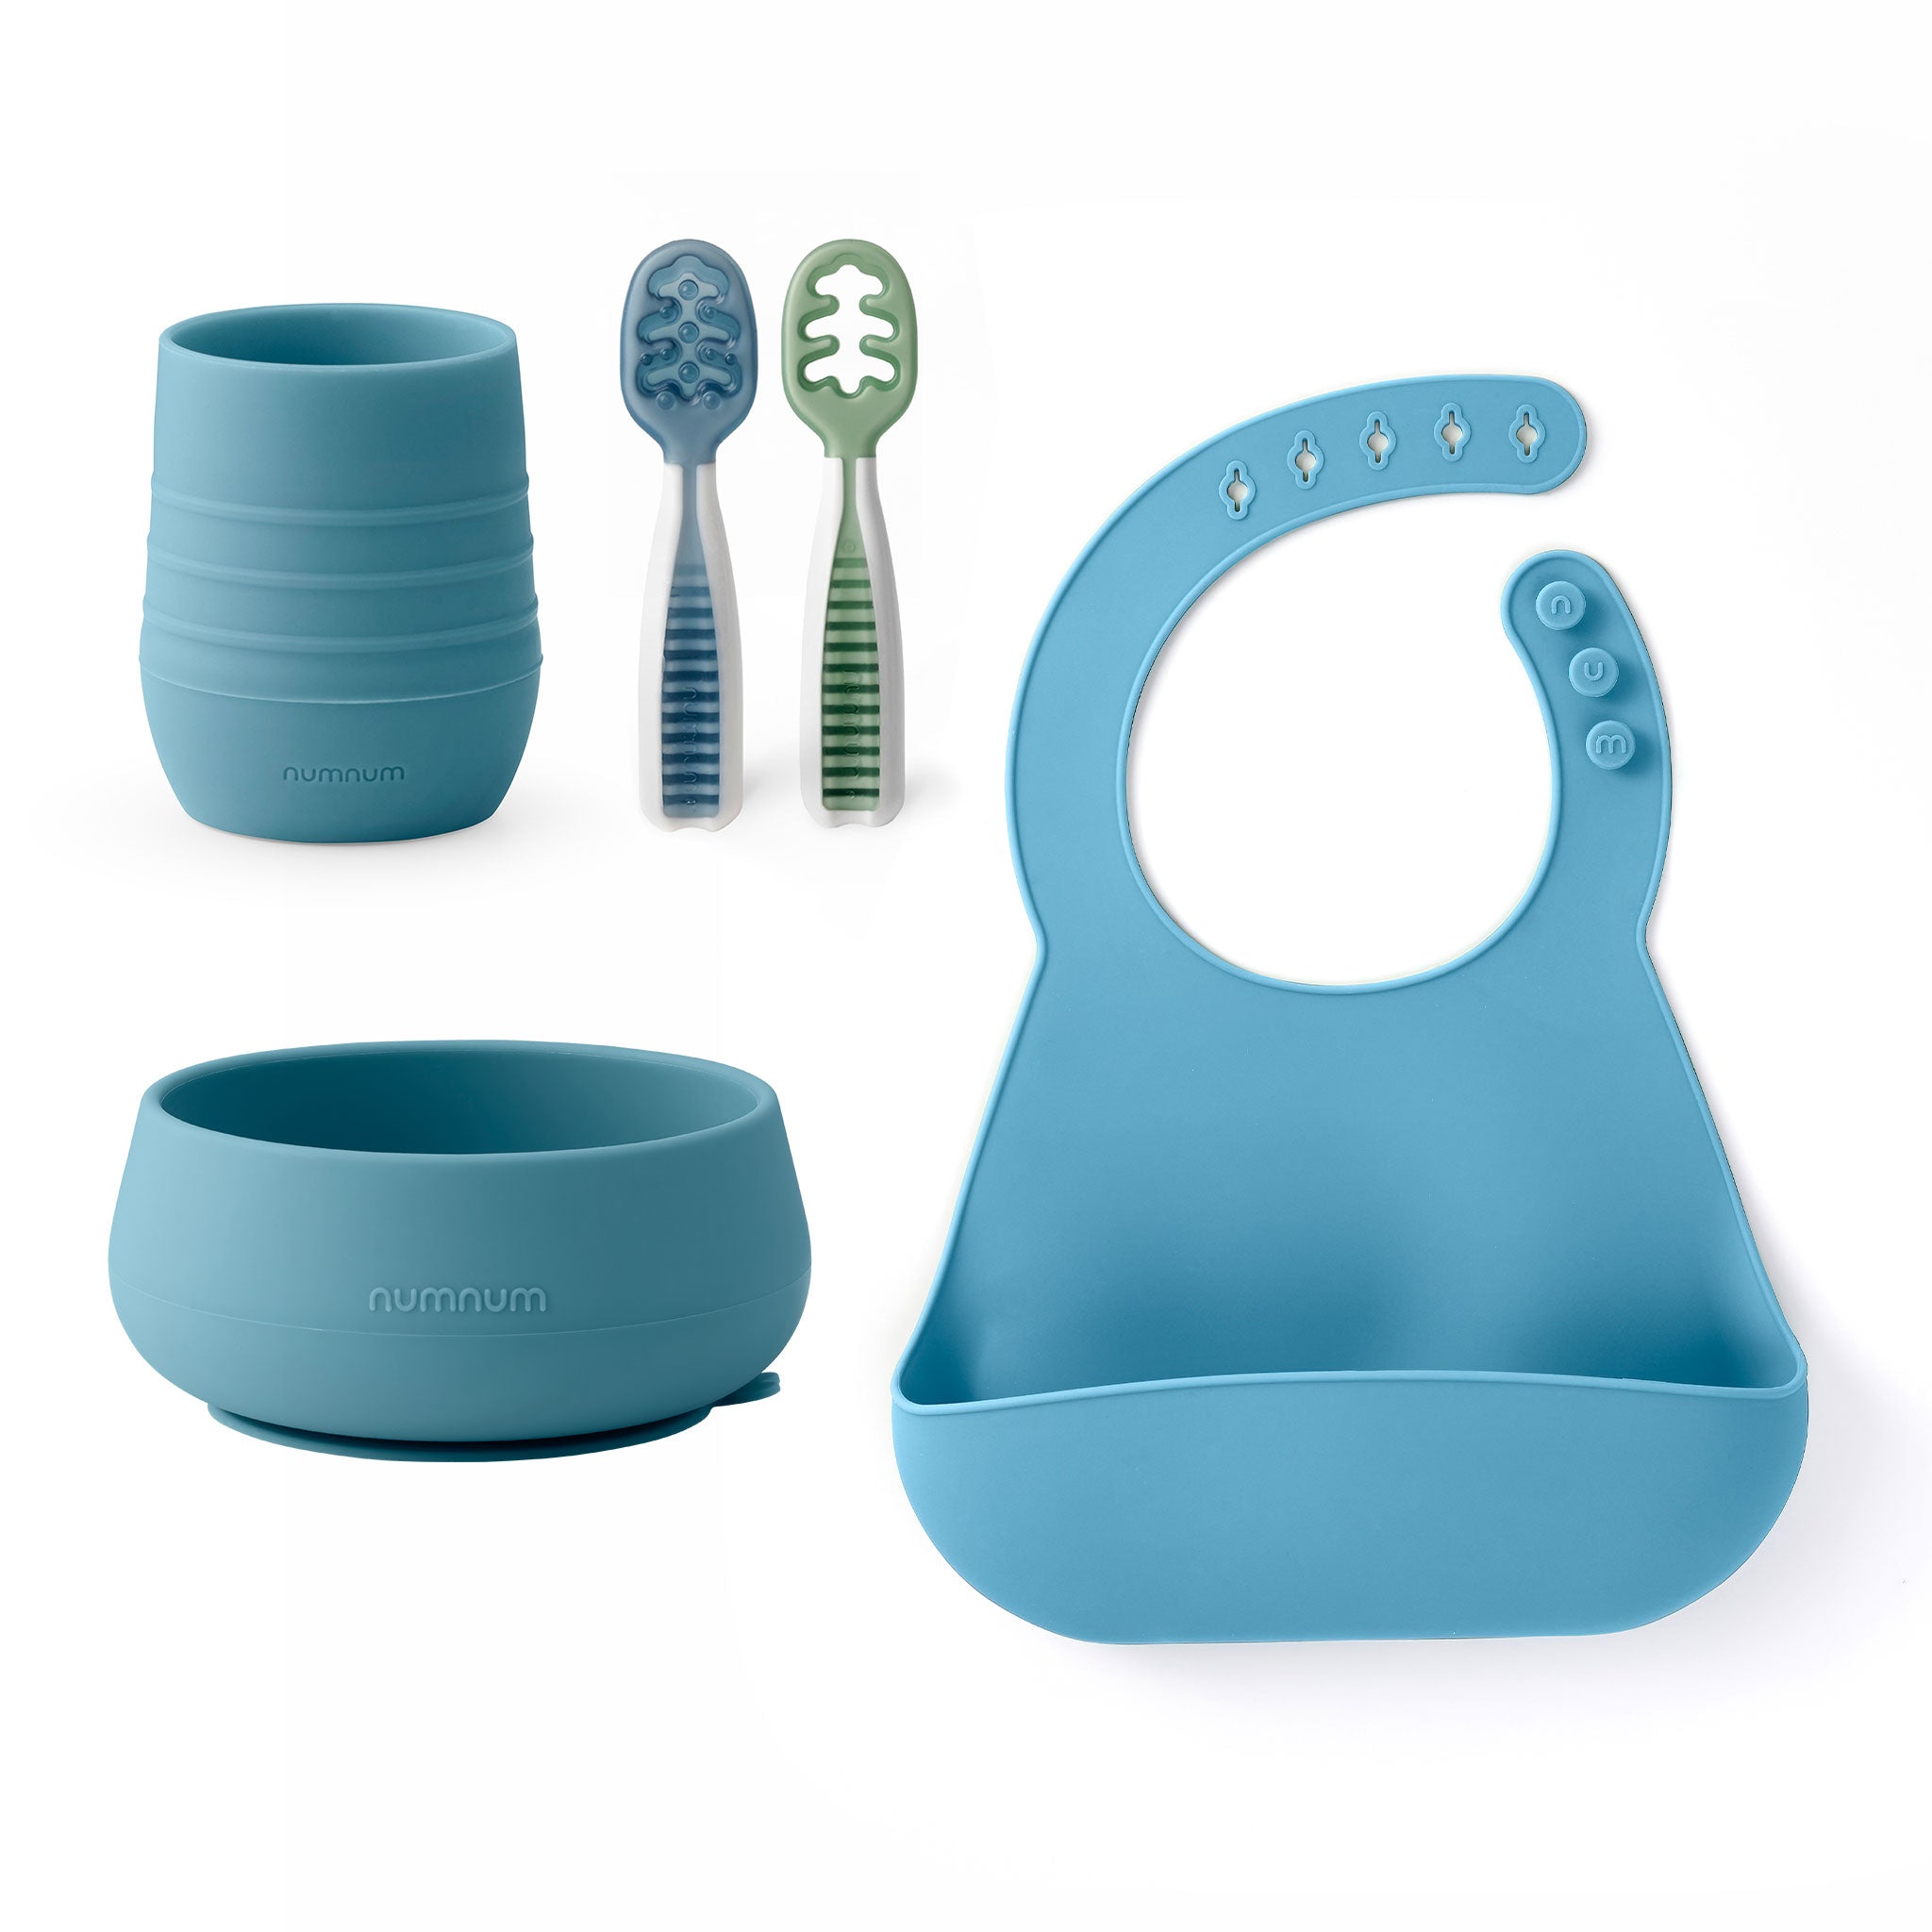 NumNum Suction Bowl - Blue + Green - 189 requests